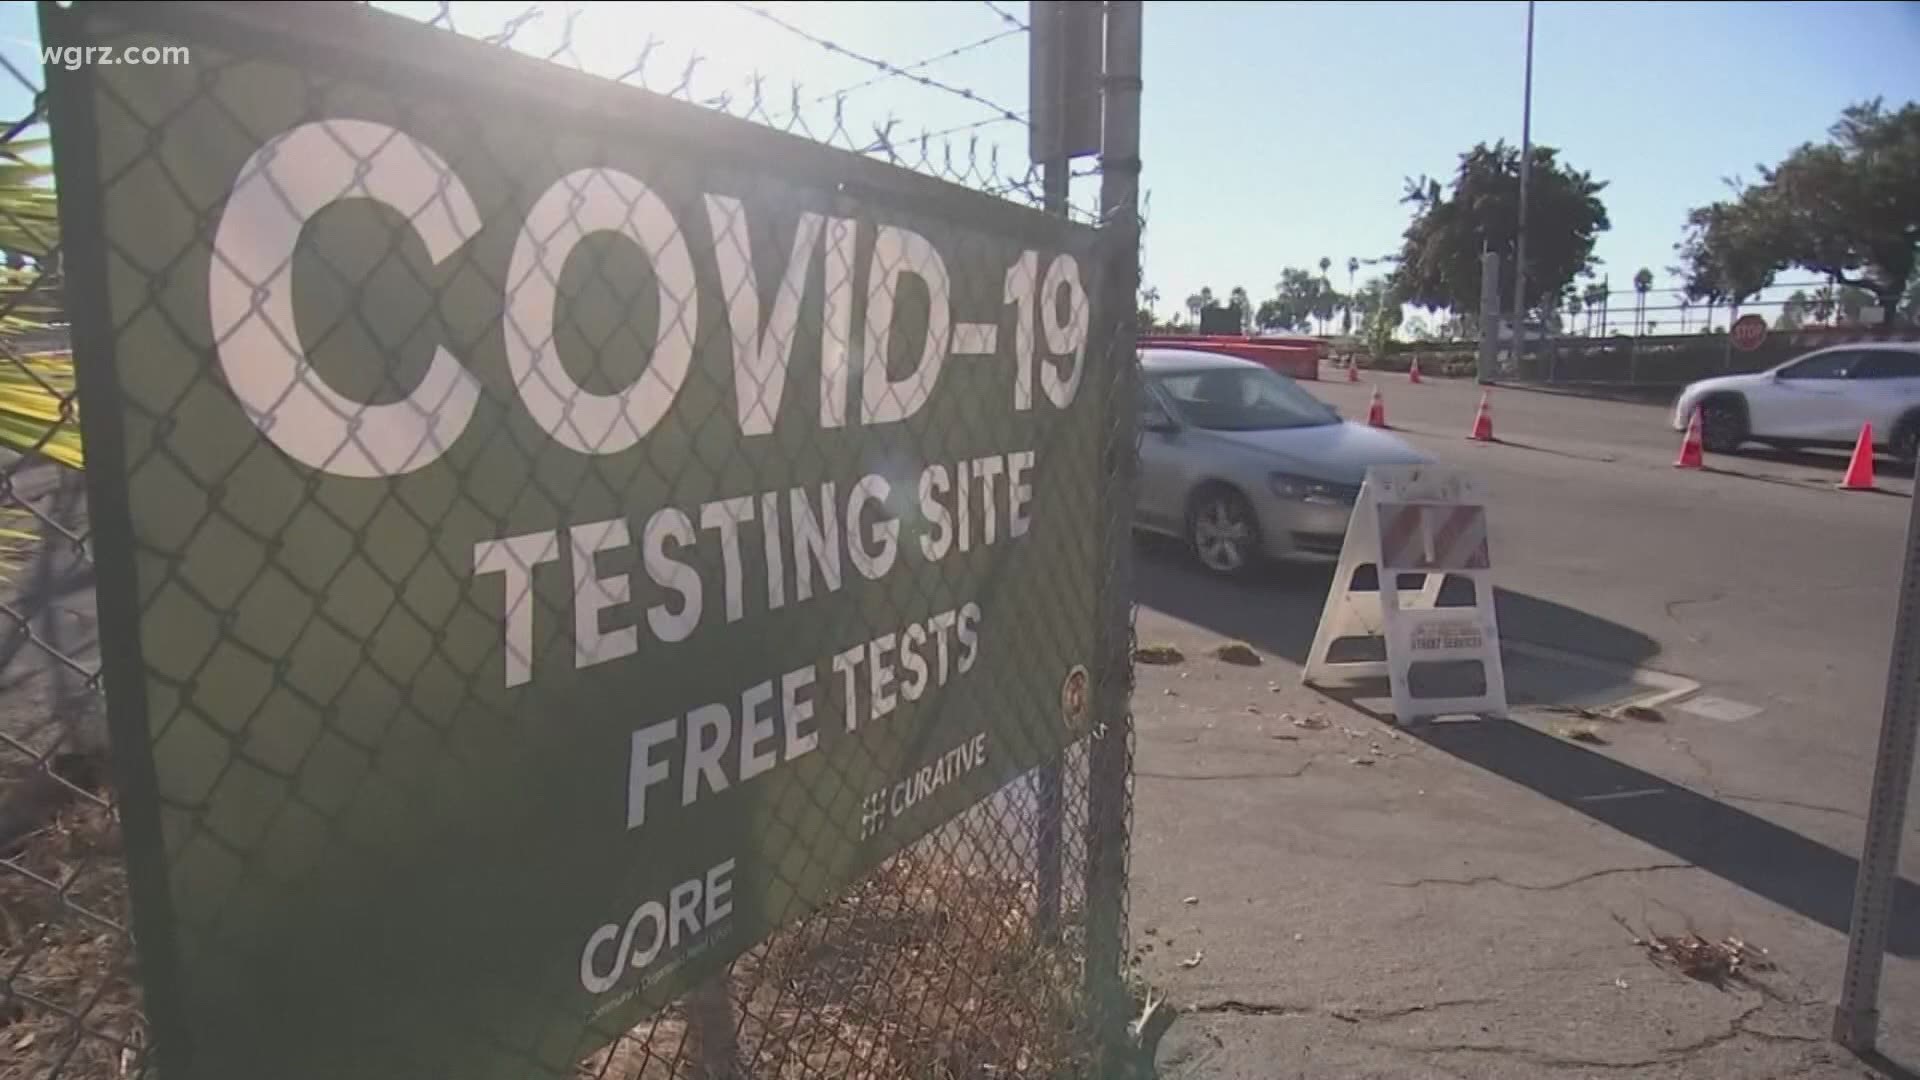 Local health officials remind people to get tested